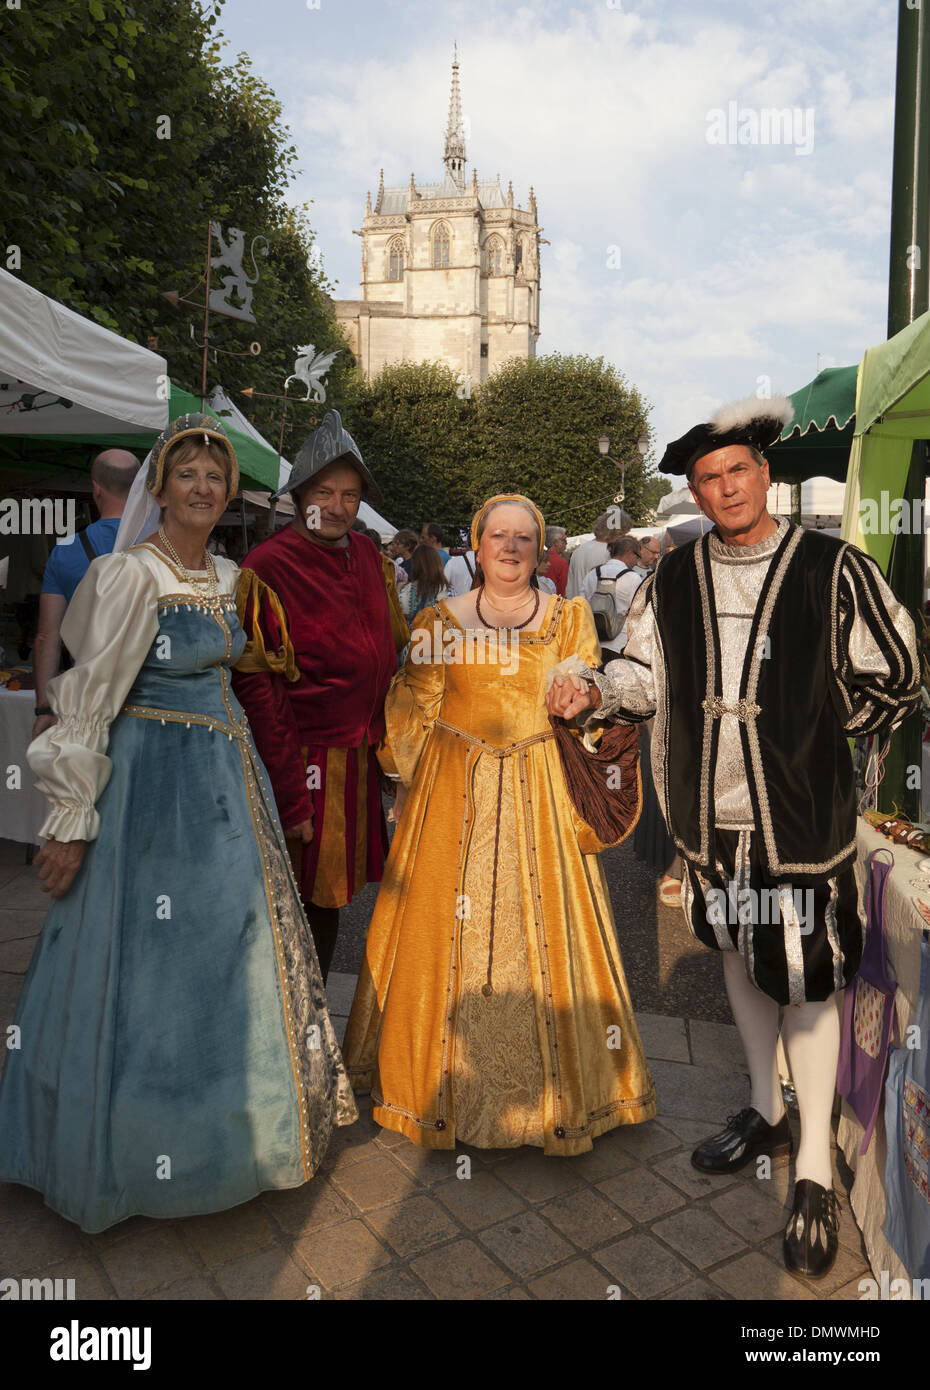 Amboise summer evening market, actors in medieval costumes, two men and ...